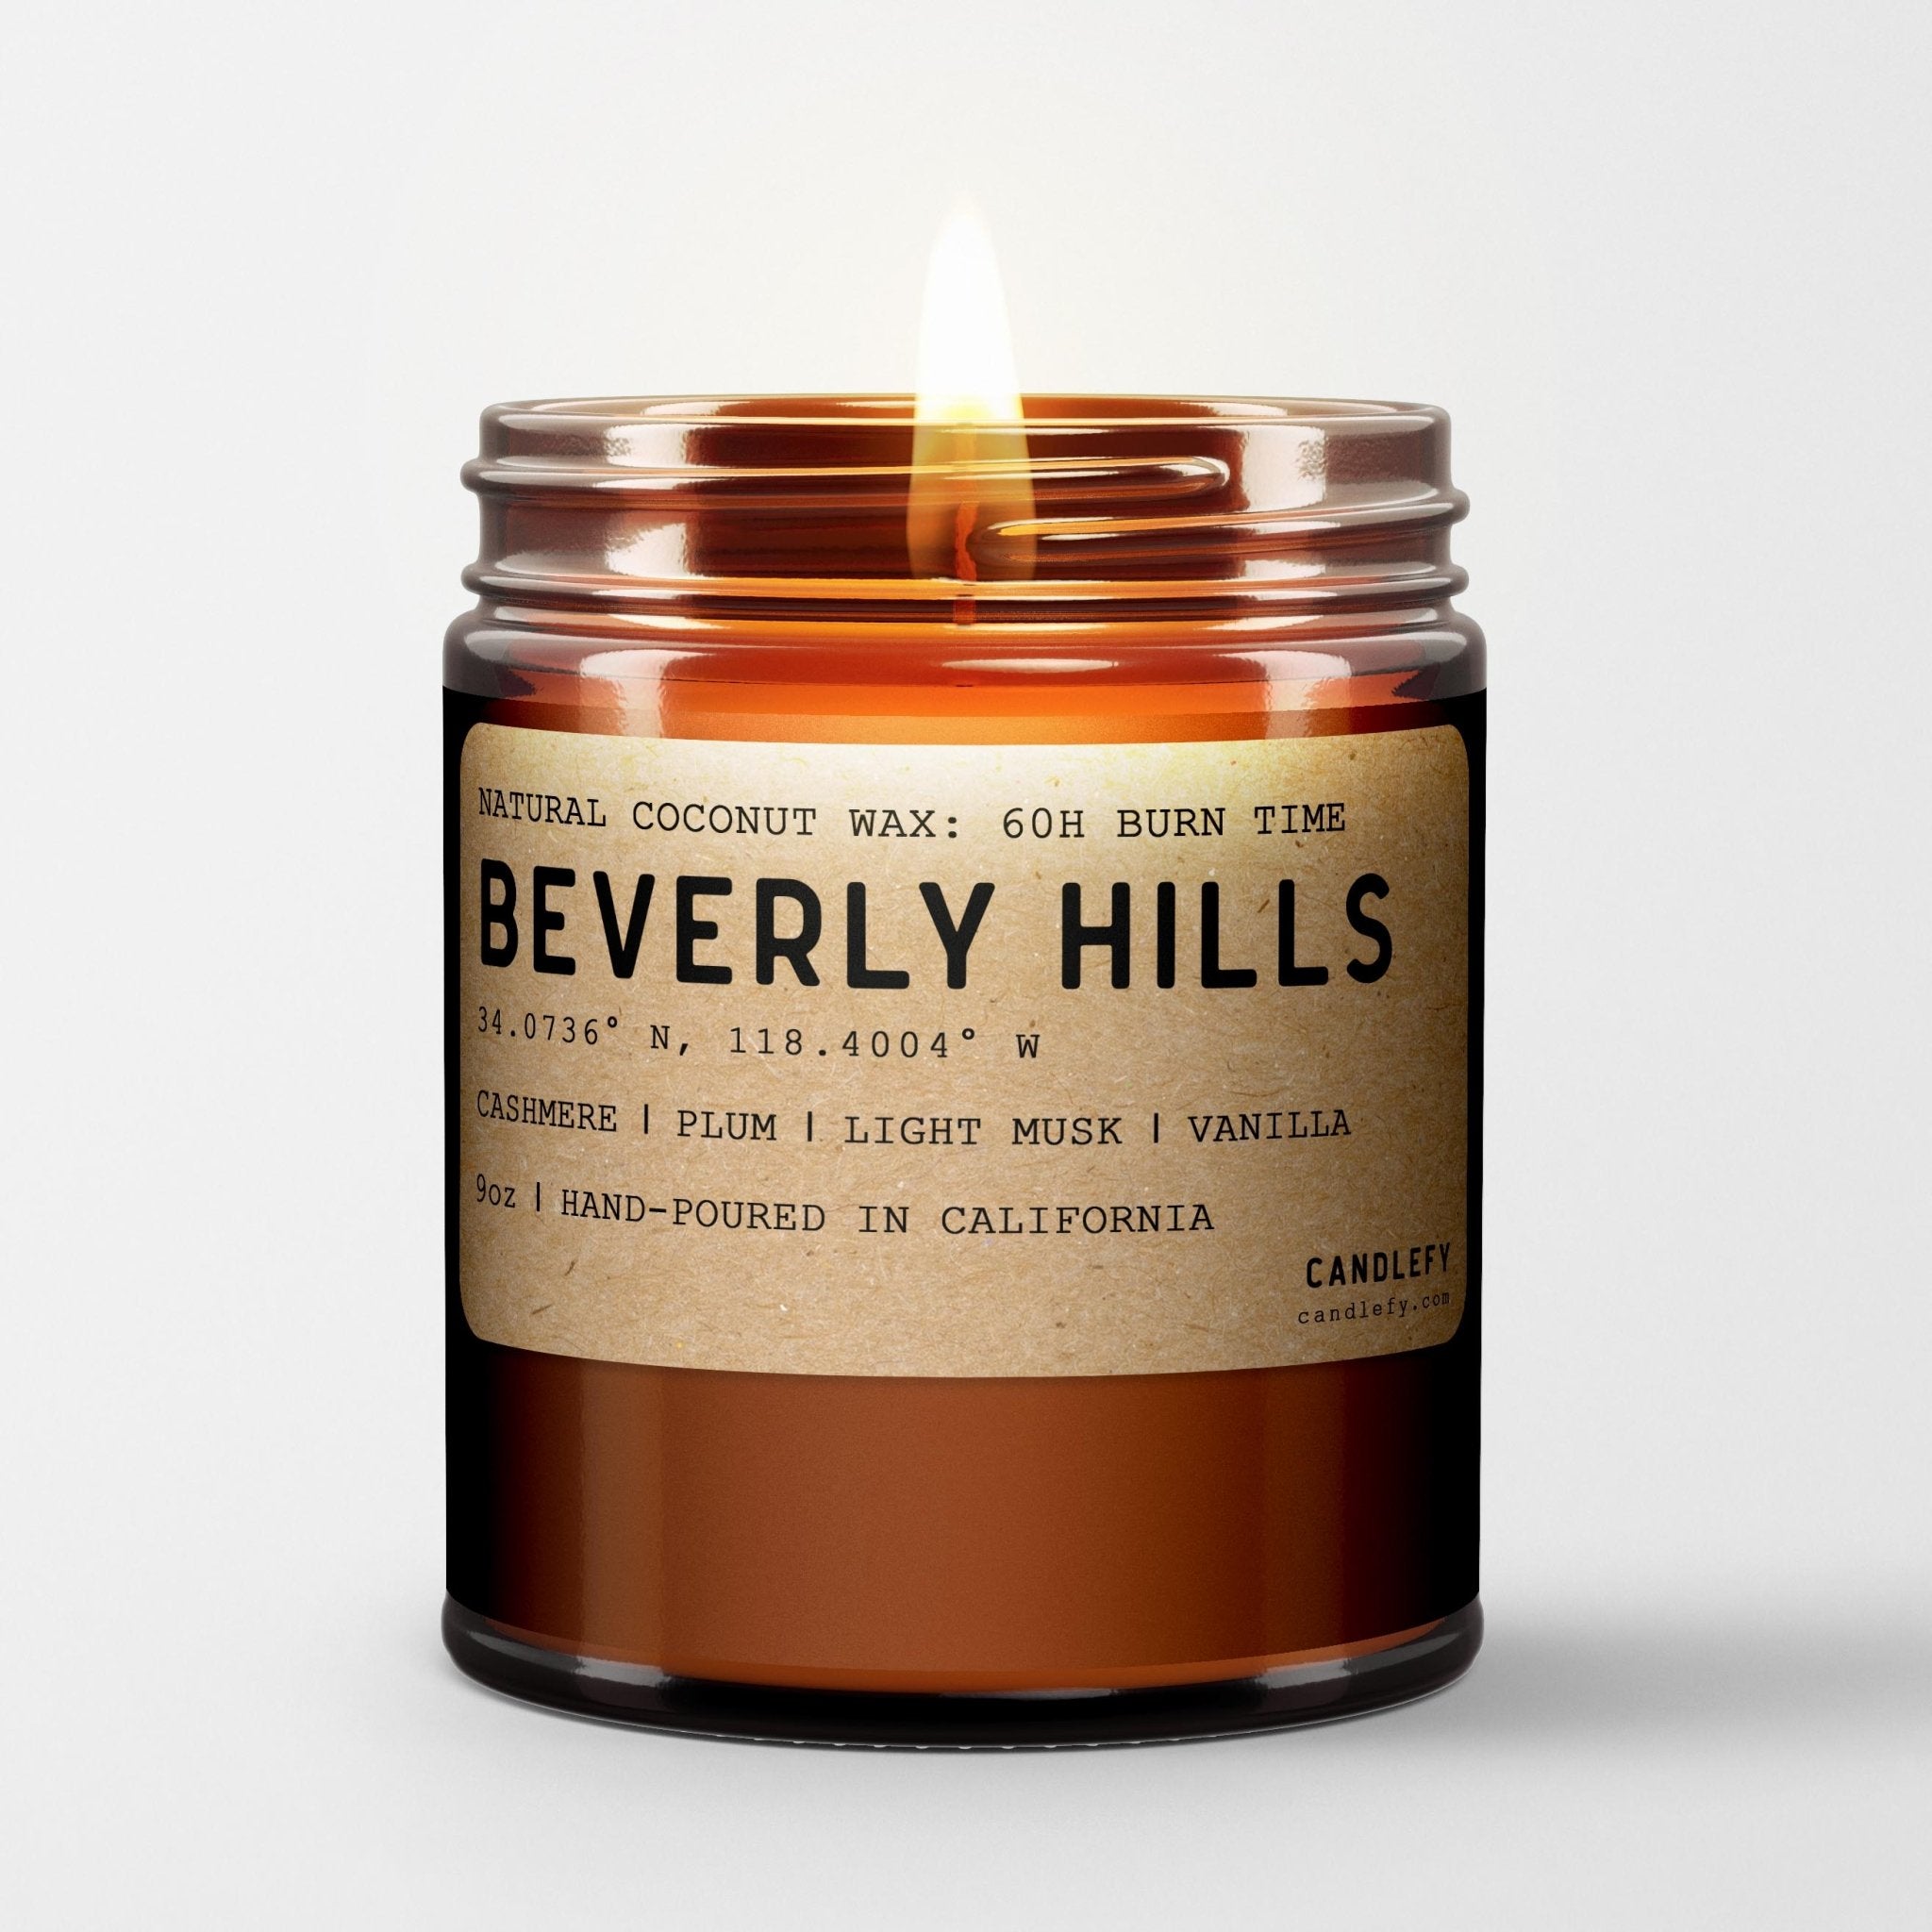 Beverly Hills: California Scented Candle (Cashmere, Plum, Musk) - Candlefy